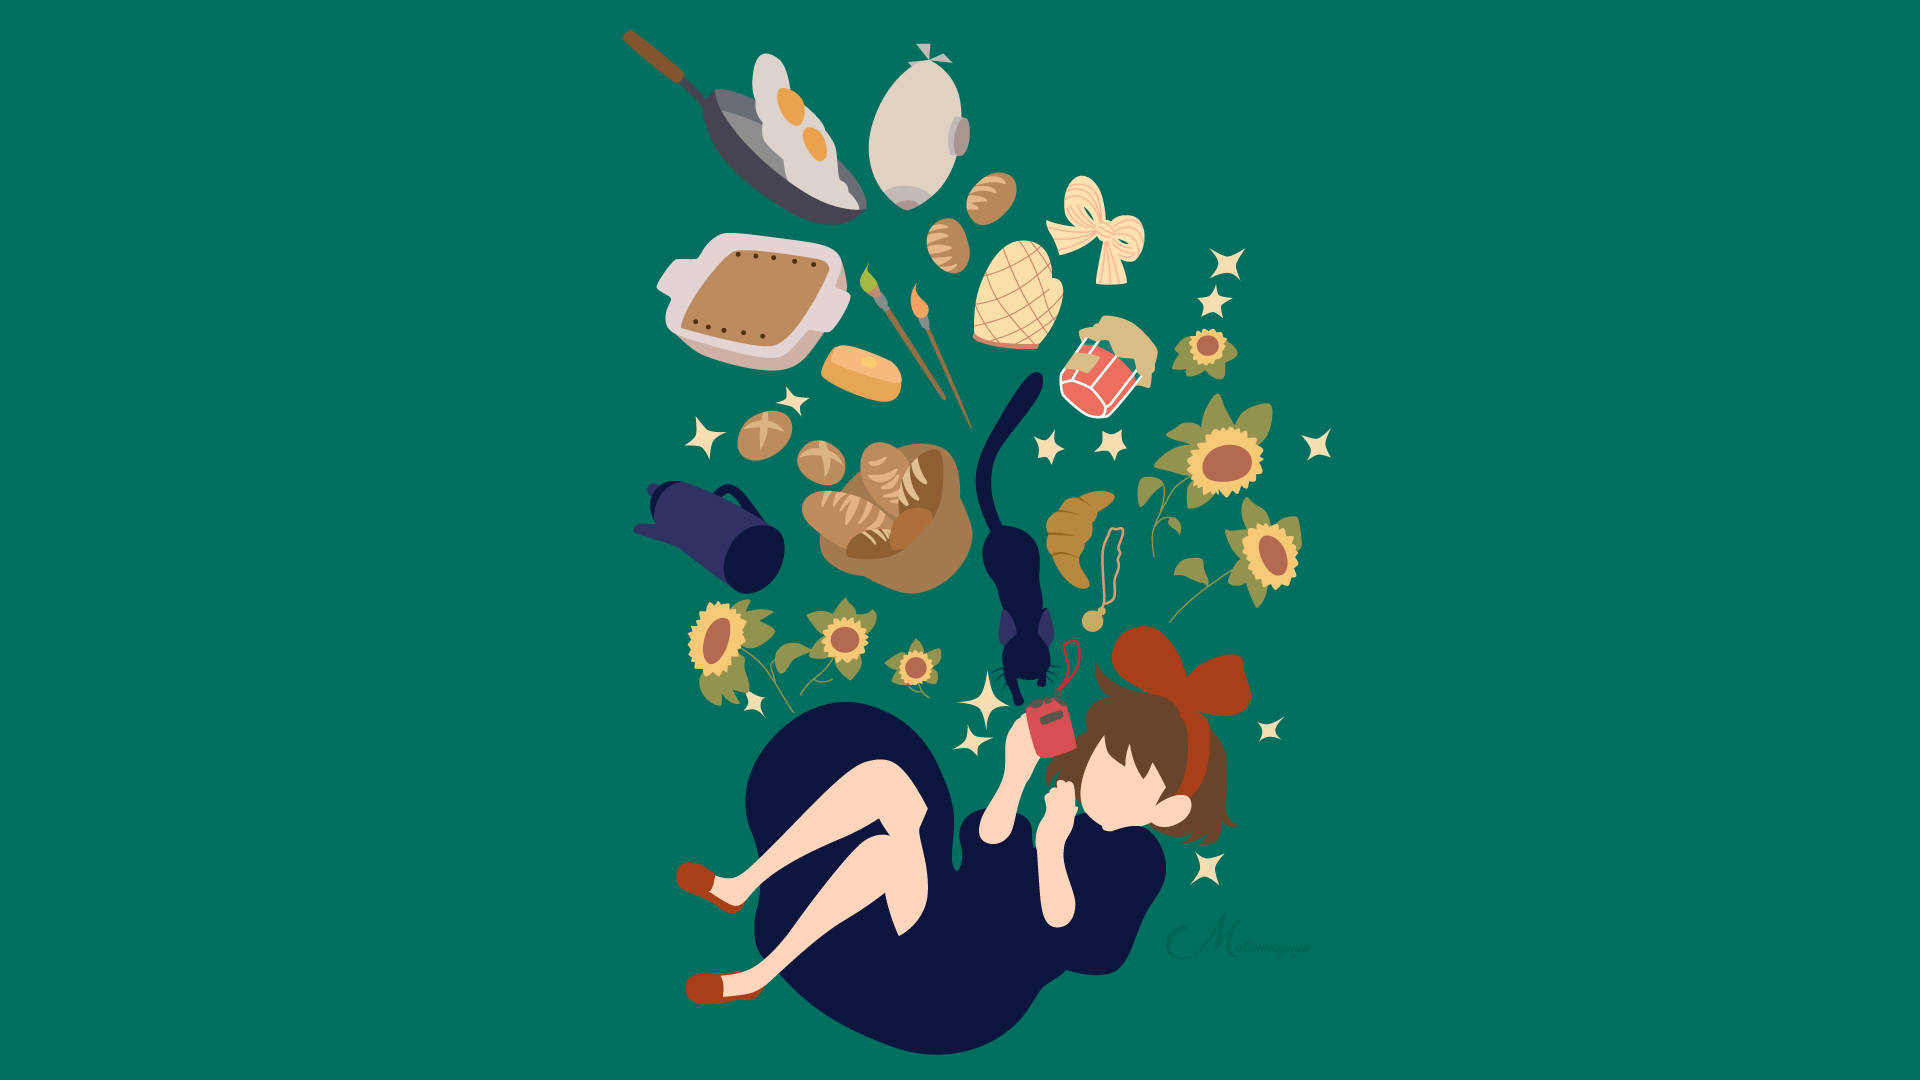 Kiki Vector Art From Kikis Delivery Service